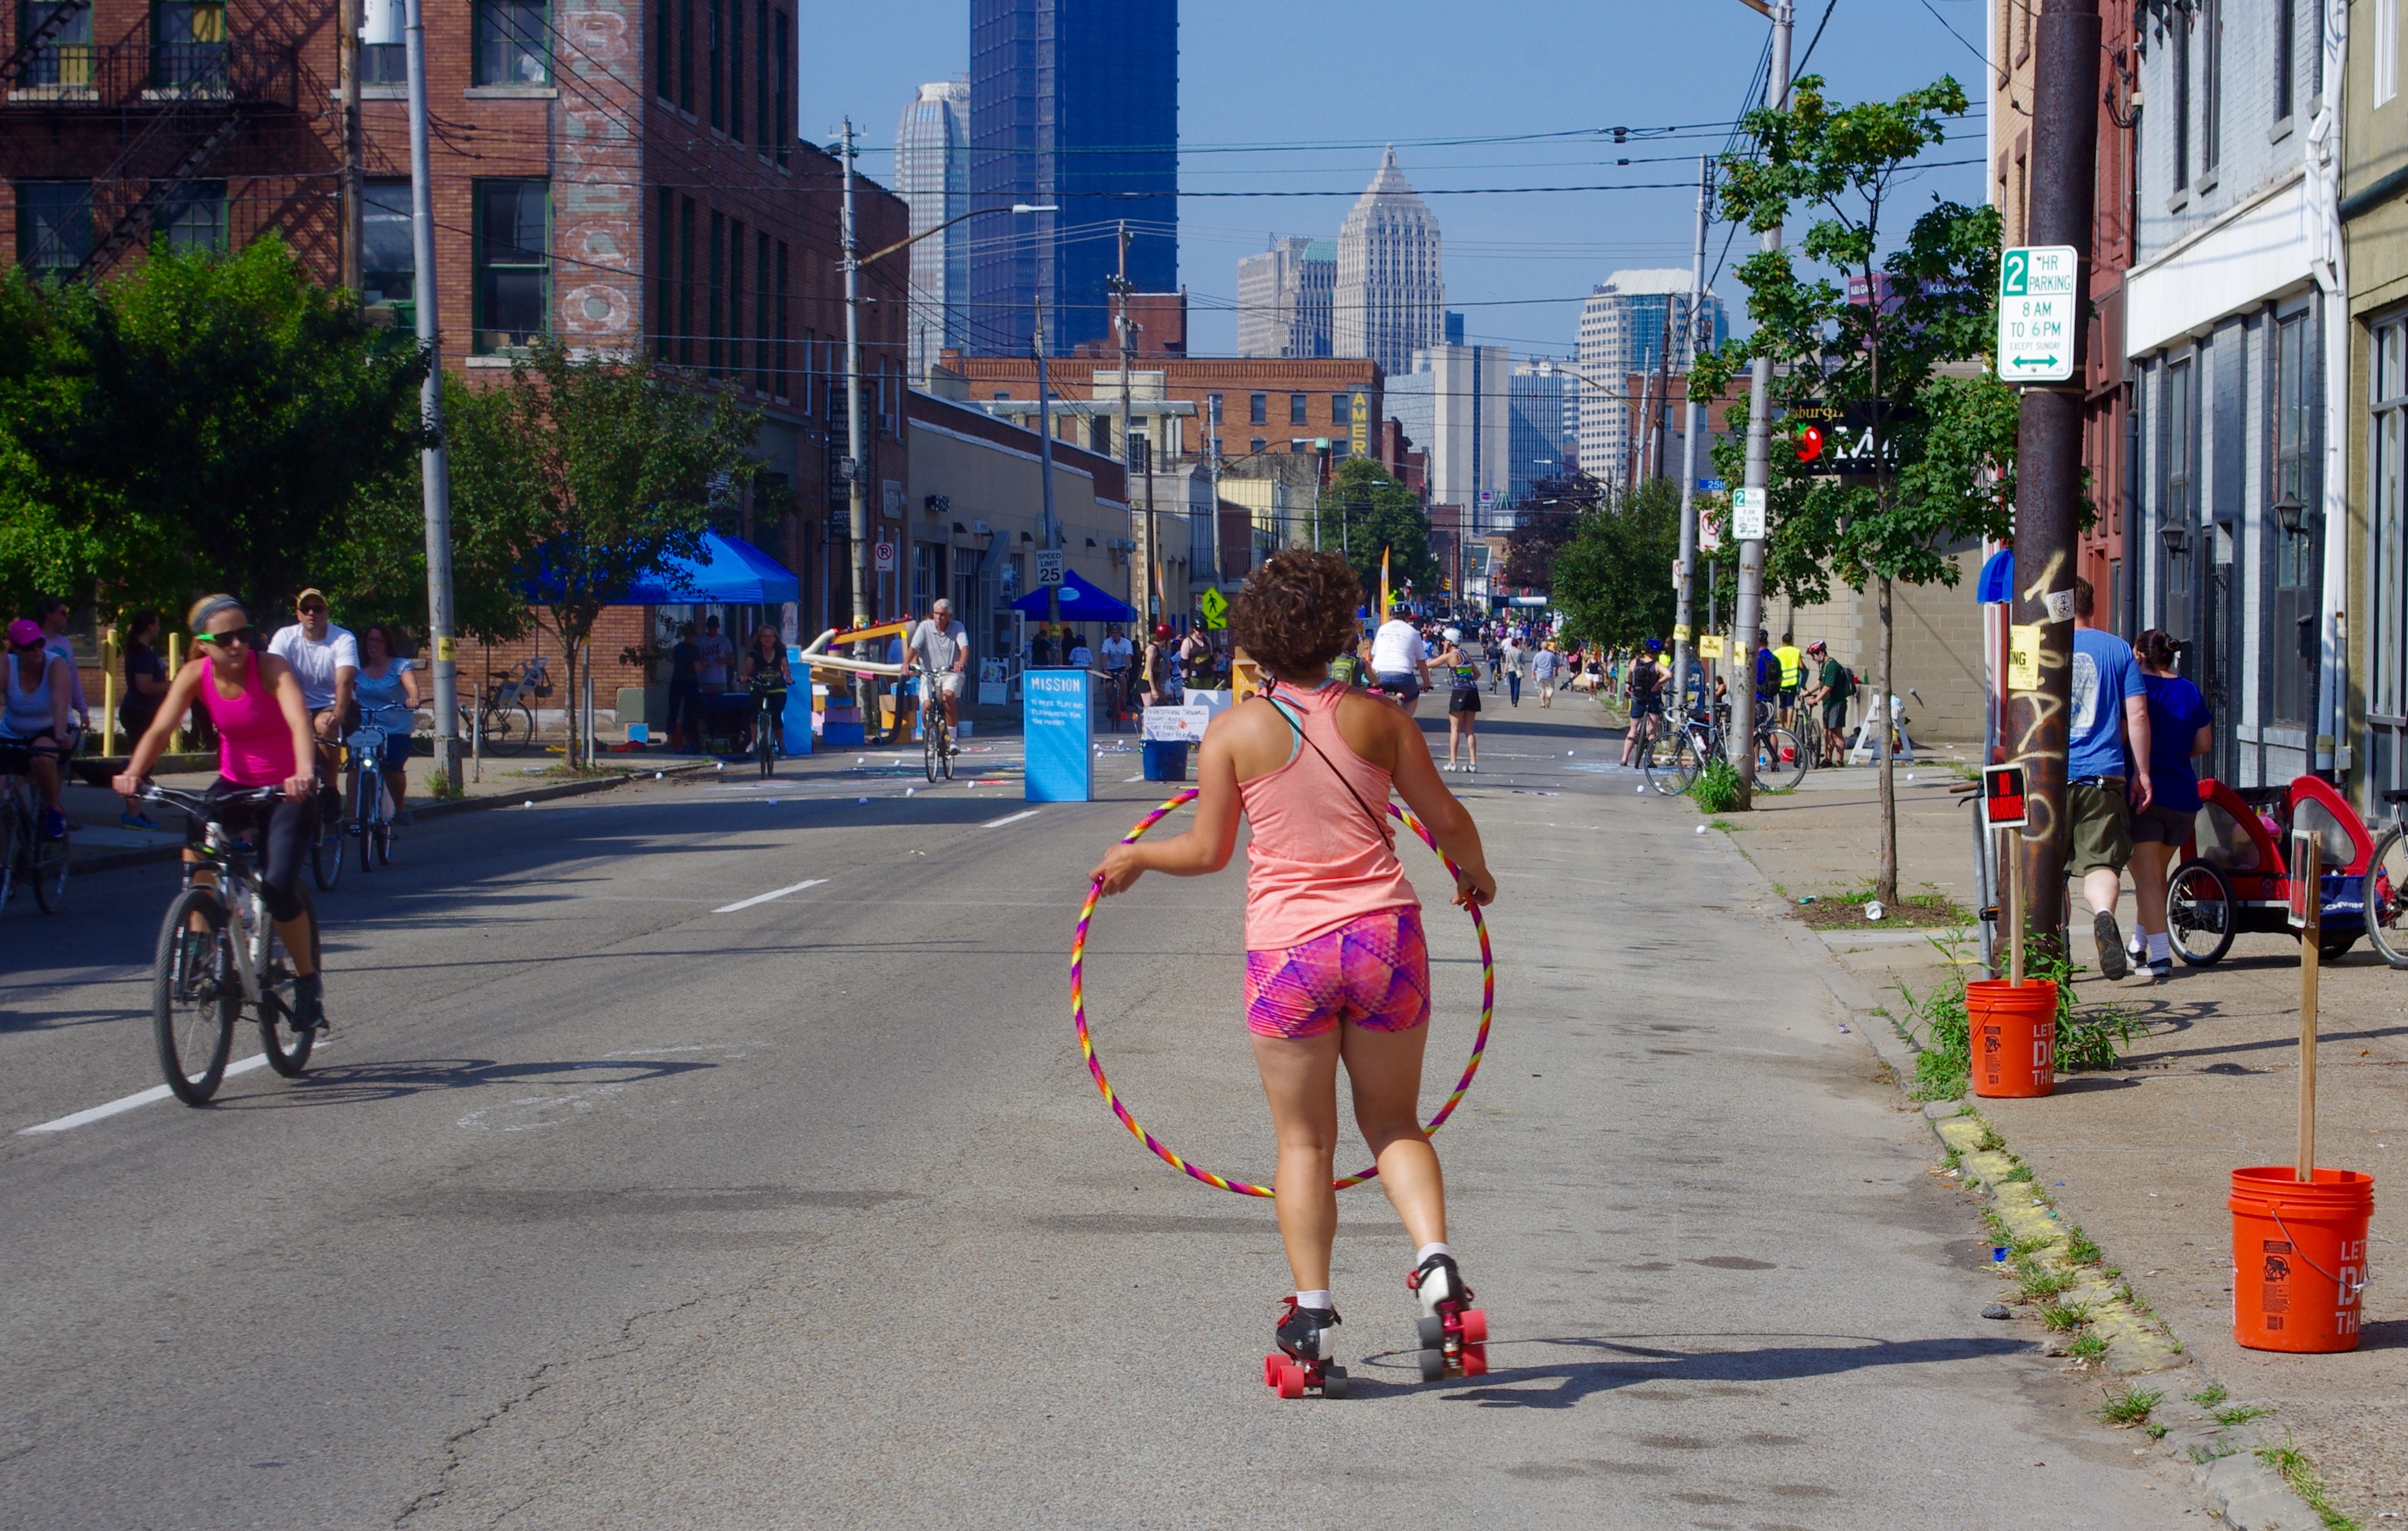 Holly Miller hula hoops while roller skating towards downtown.